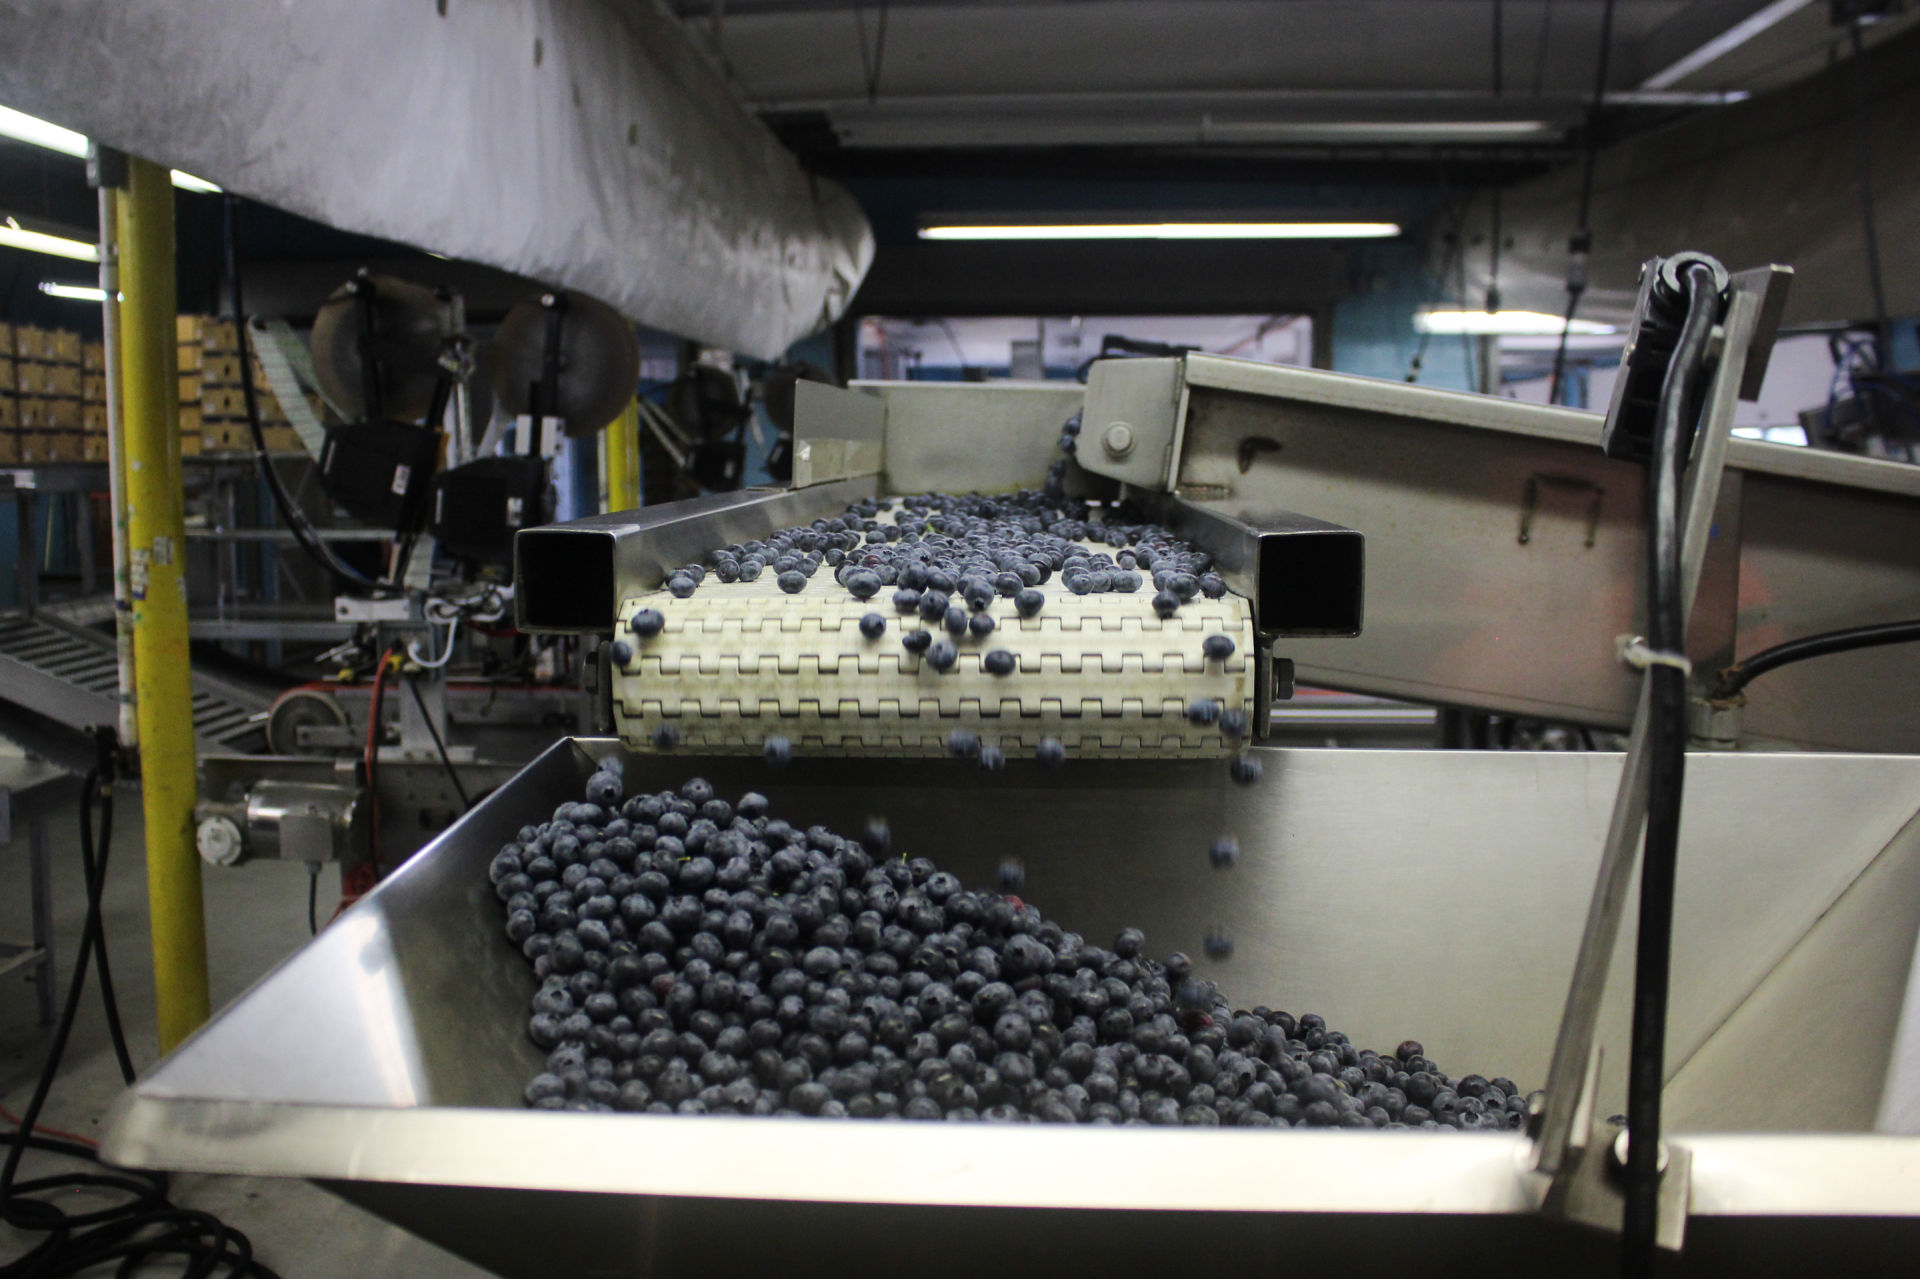 Part of the fresh blueberry packing line at the Atlantic Blueberry Co.